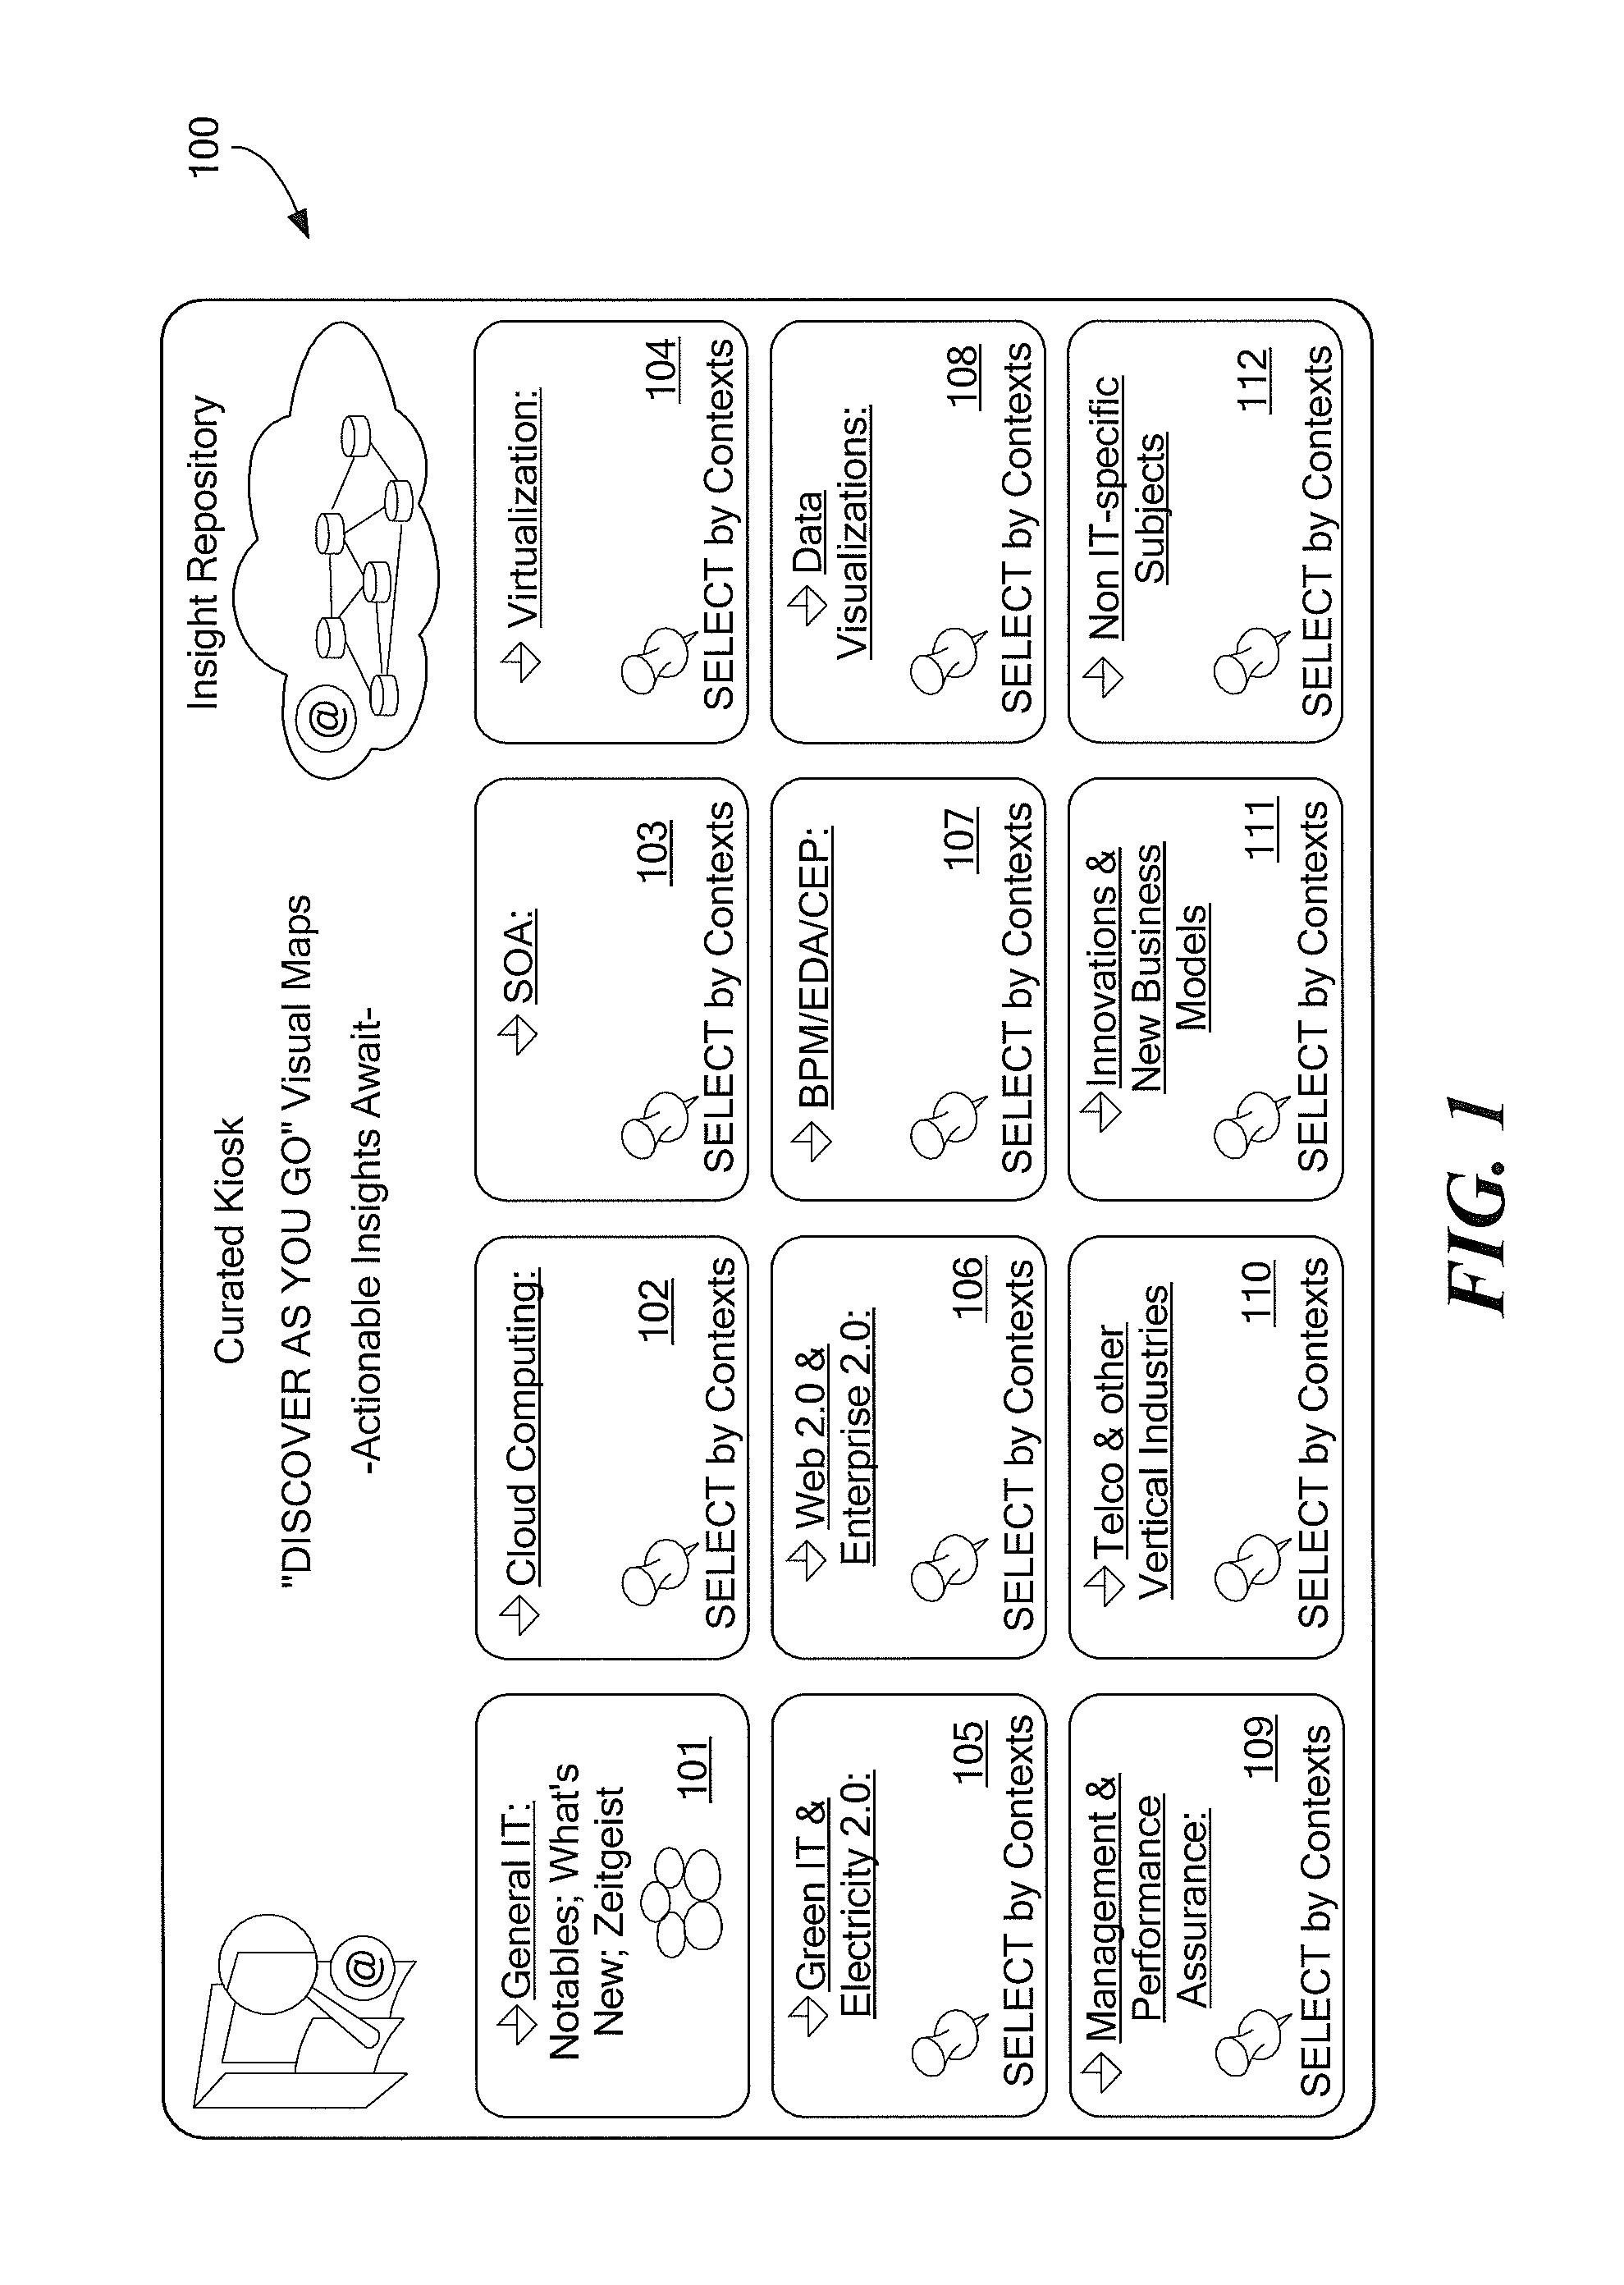 System and method for managing health analytics